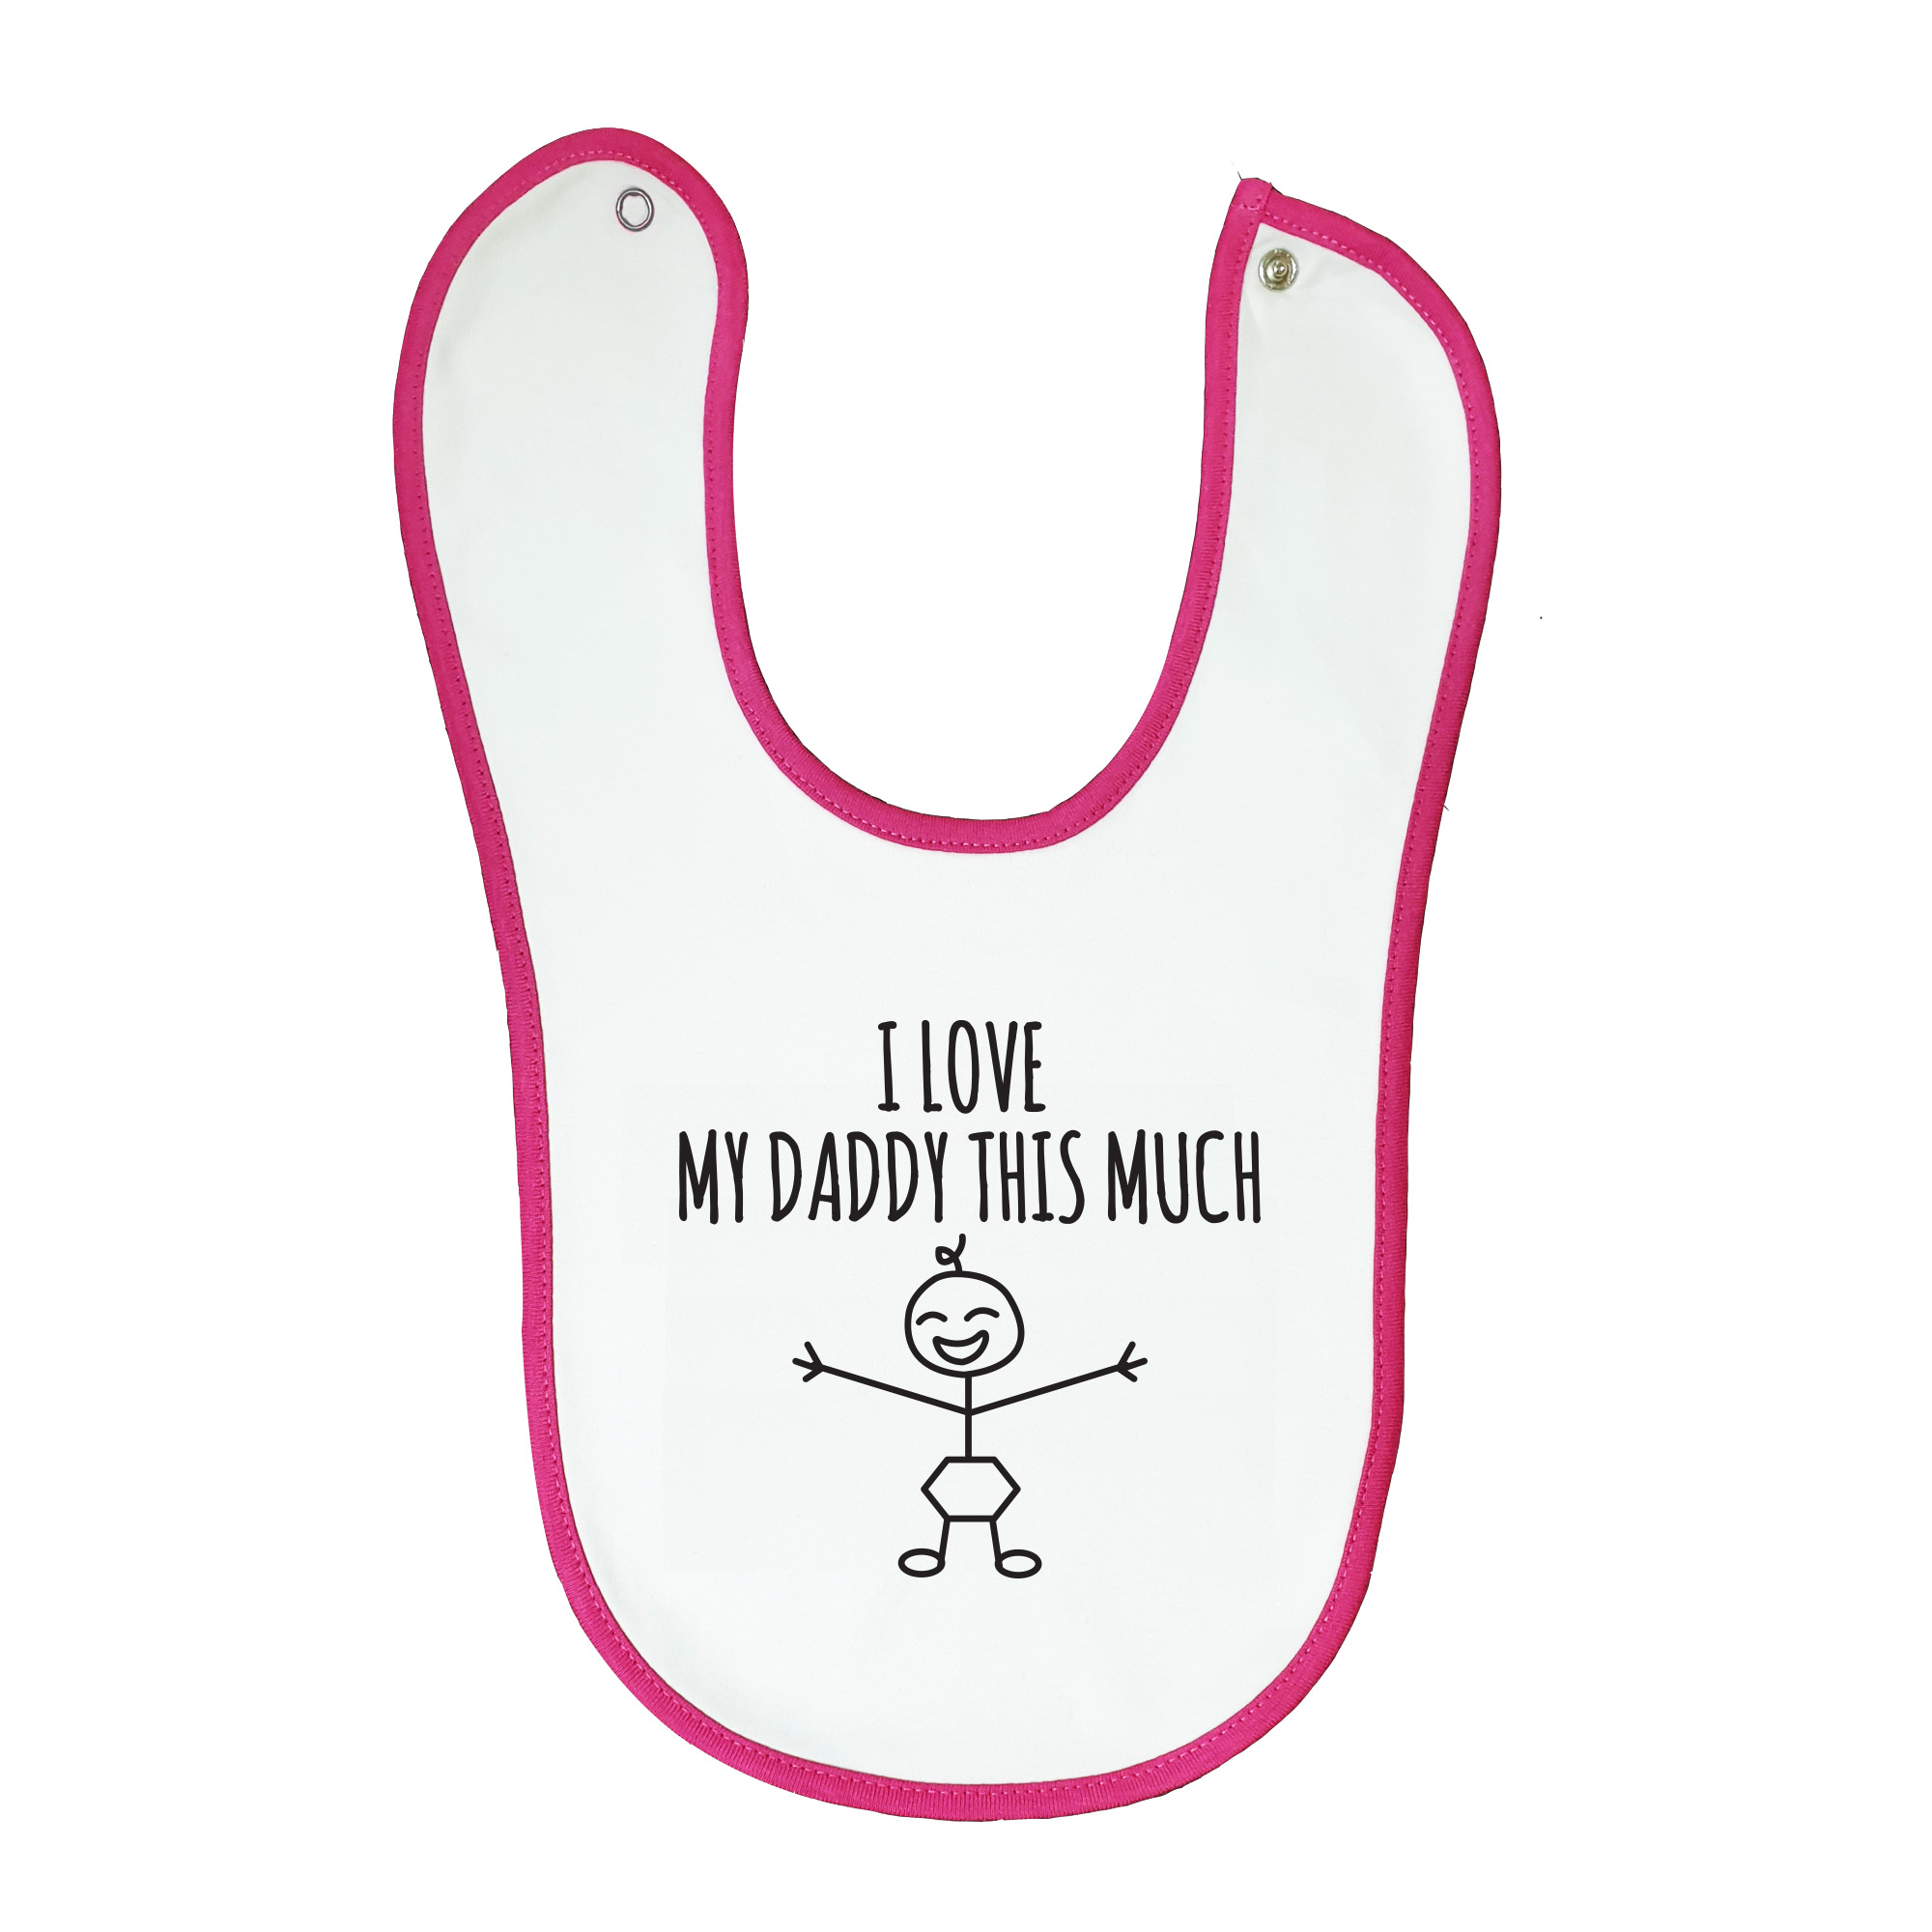 Soft baby bib, white with pink trim, 100% cotton machine washable. Age: 6-12 months. Print: I Heart My Daddy This Much. 